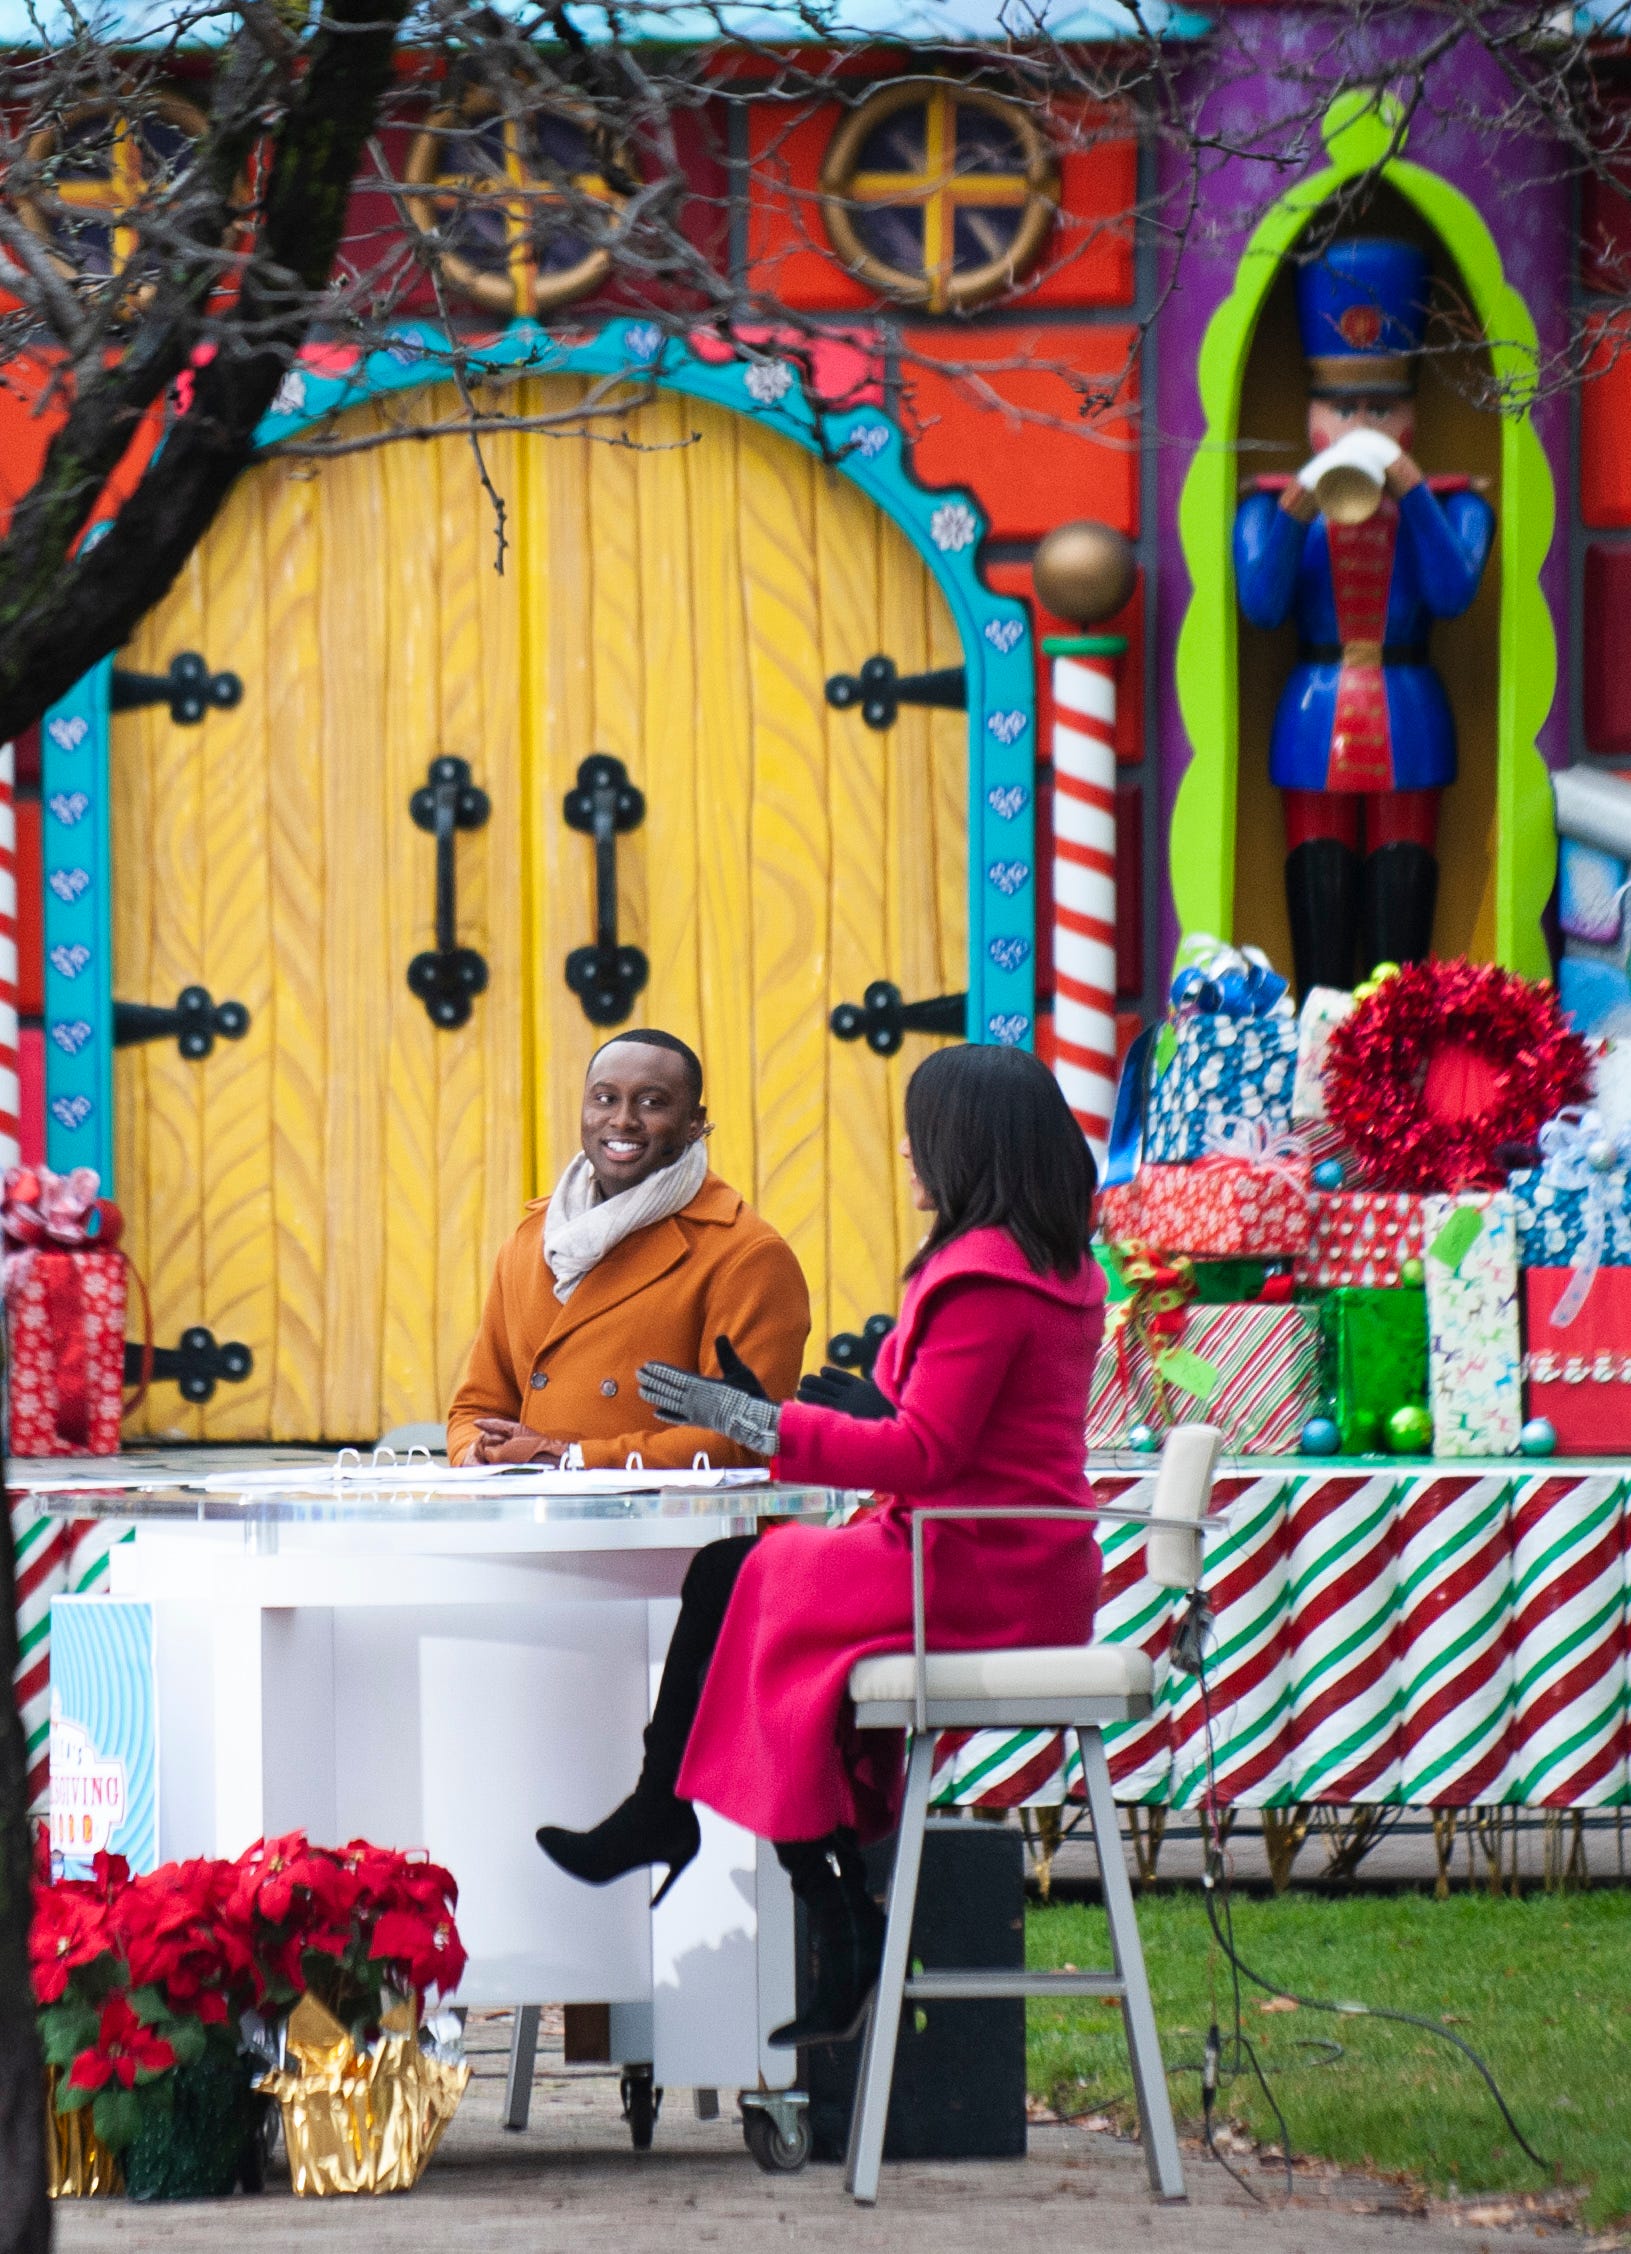 Outside WDIV Local 4 studio in downtown Detroit, television personalities Evrod Cassimy and Rhonda Walker host the mostly-pre-recorded America’s Thanksgiving Parade show. Due to the coronavirus pandemic, this year's parade was reimagined as a televised-only special broadcast on Thanksgiving Day, Thursday, November 24, 2020.